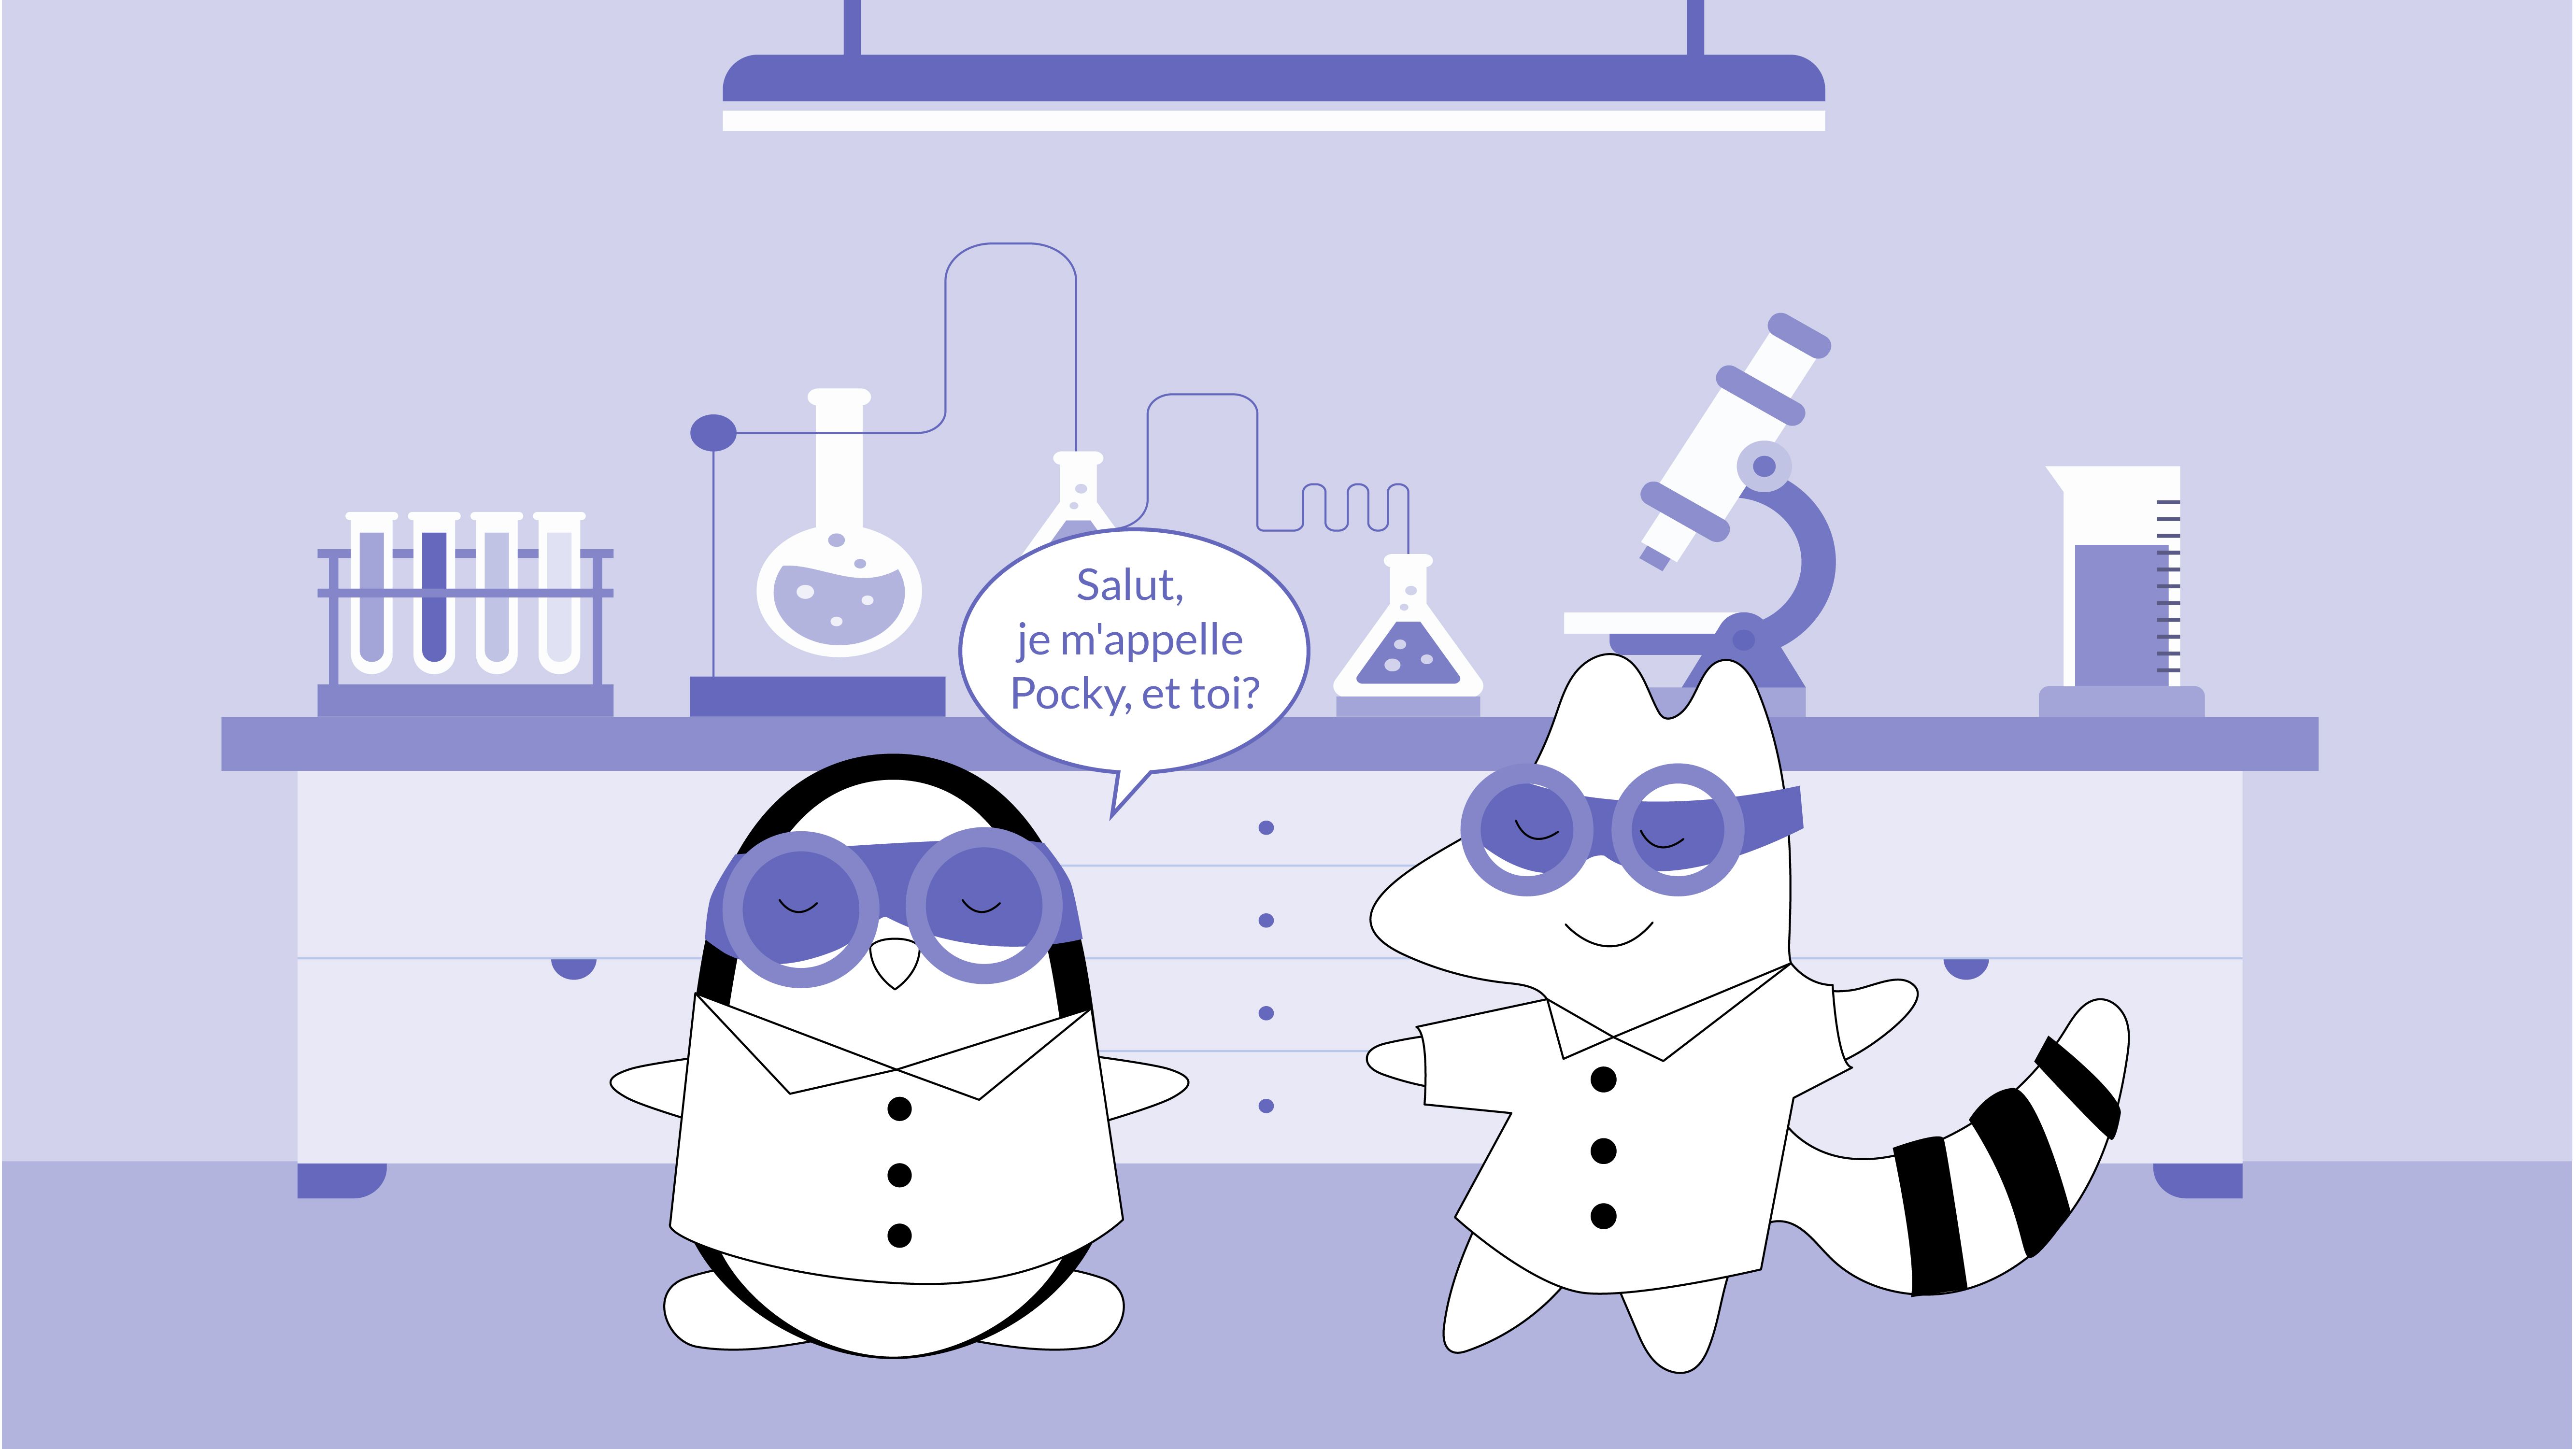 Iggy and Pocky are lab partners, wearing white lab coats and safety goggles. Pocky introduces himself, saying, “Salut, je m'appelle Pocky, et toi?”